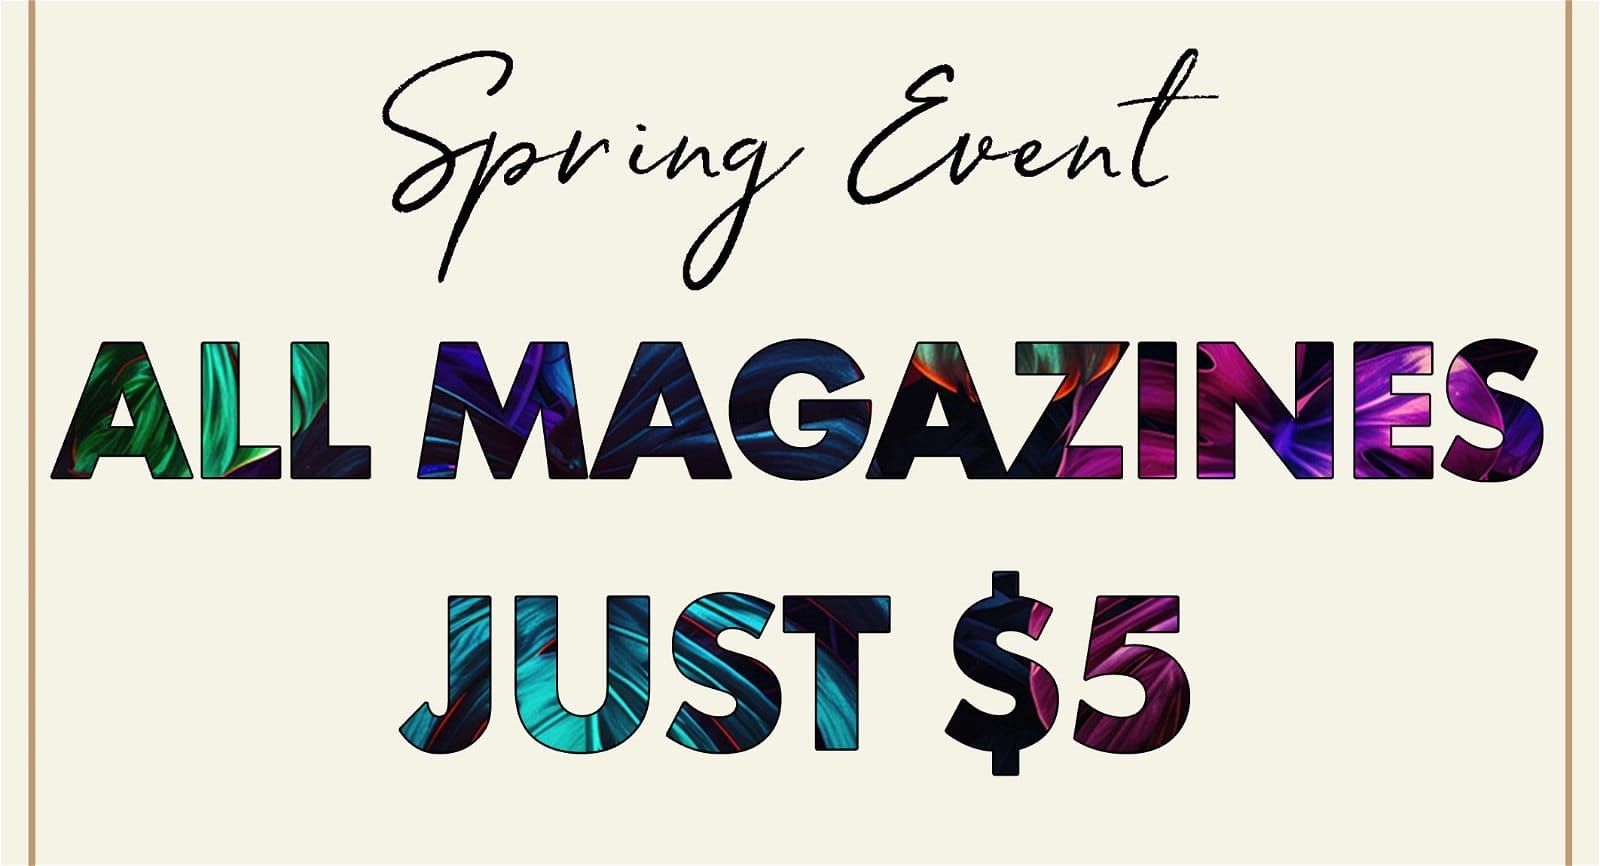  All Magazines Are Just \\$5